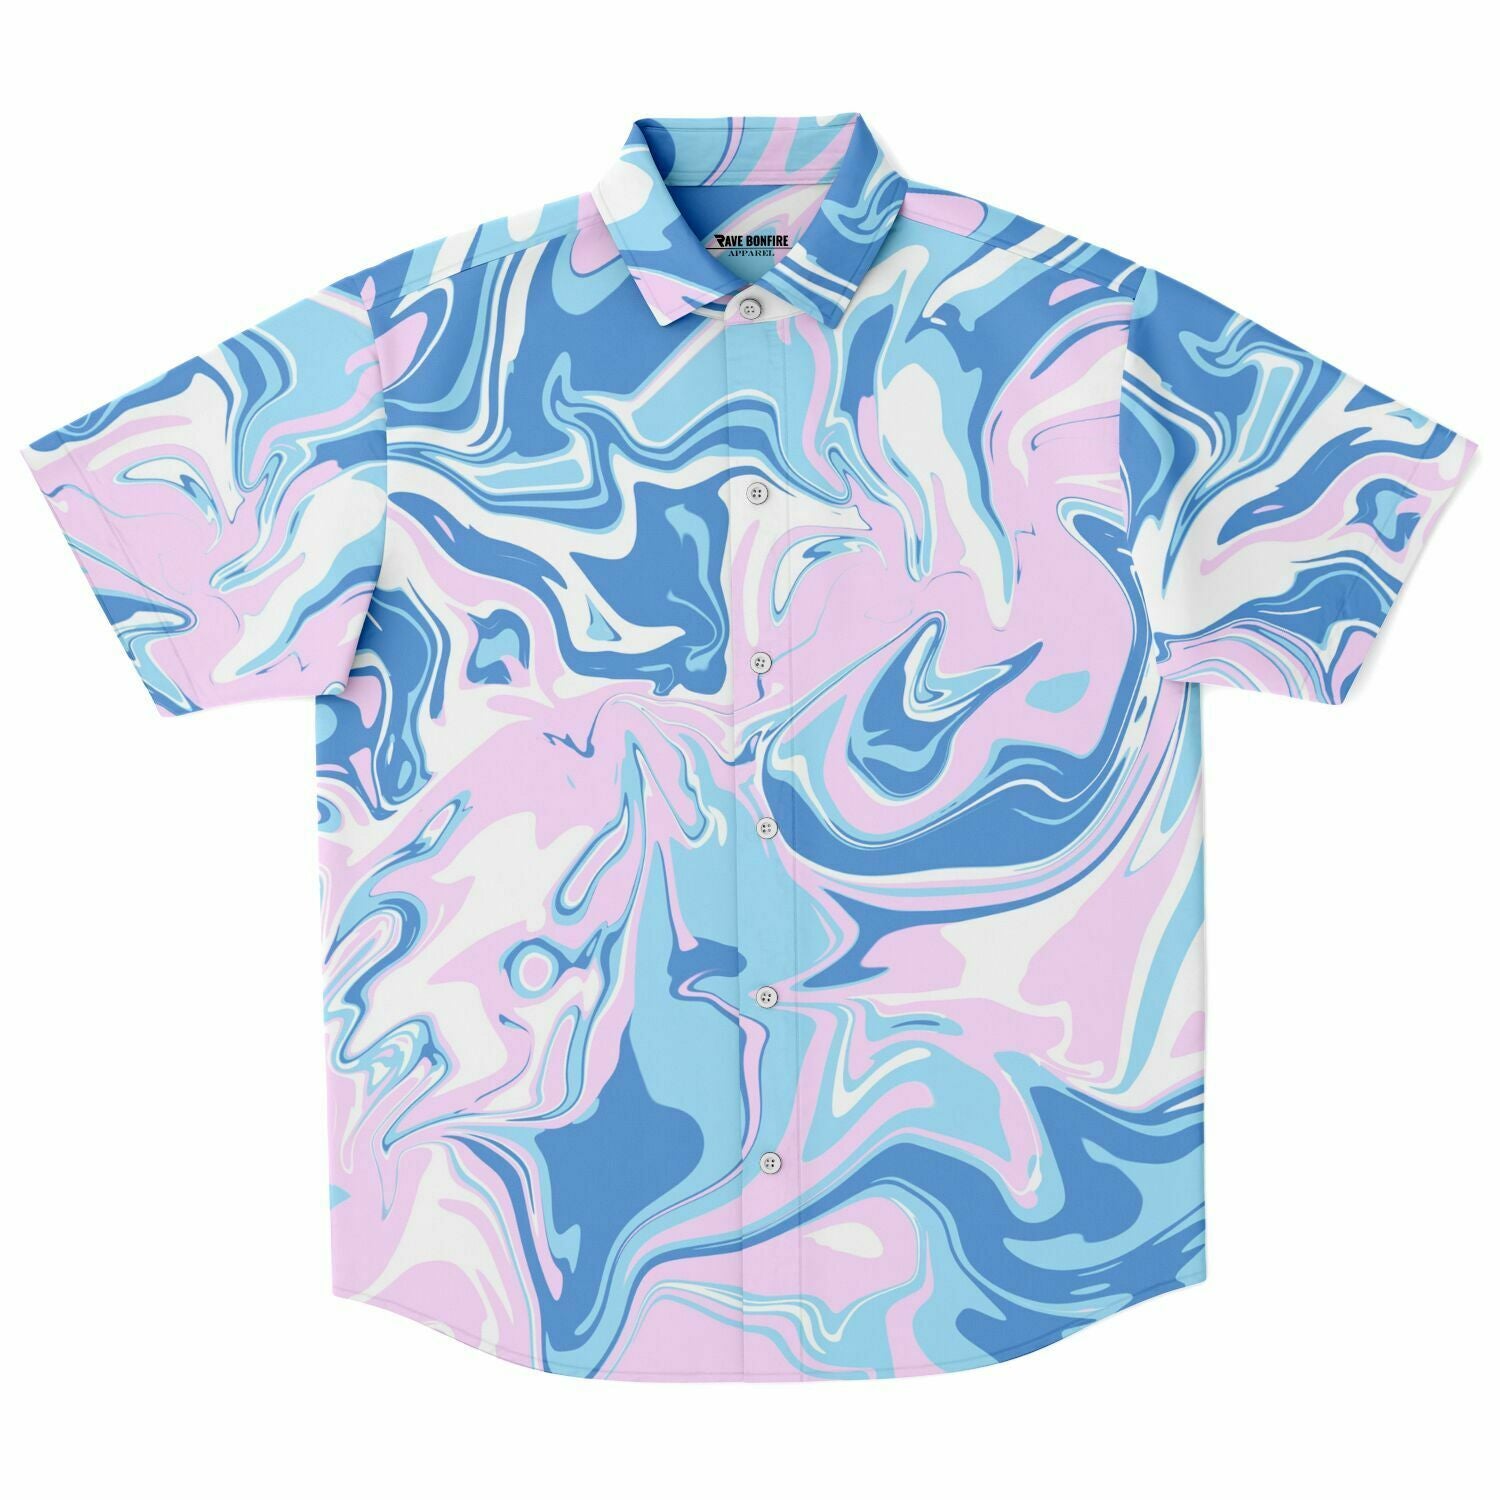 A Colorful Acid trip Short Sleeve Button Down Shirt with a pink and blue marble print.